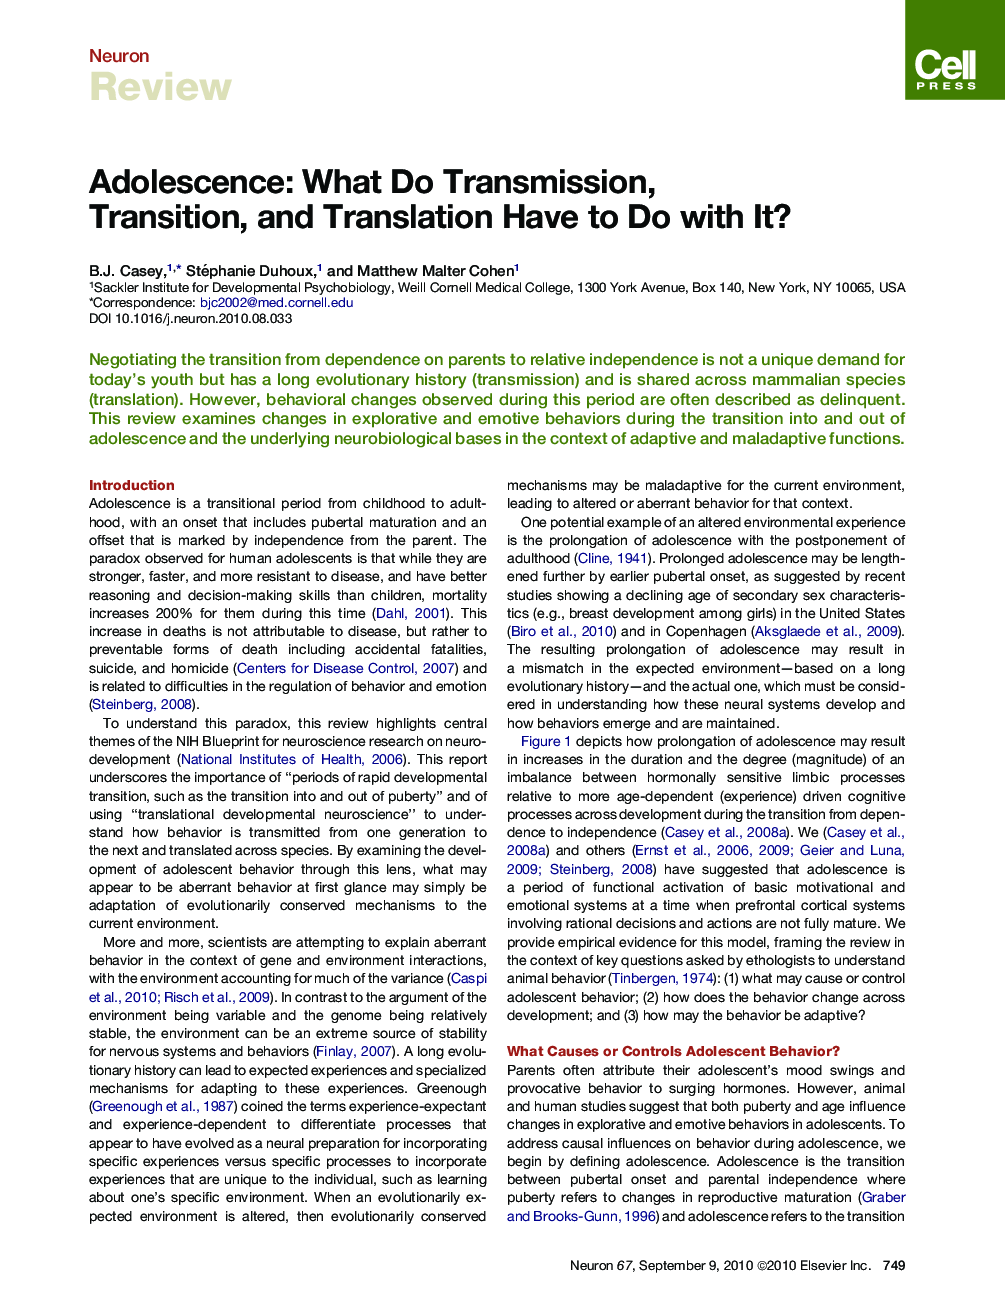 Adolescence: What Do Transmission, Transition, and Translation Have to Do with It?